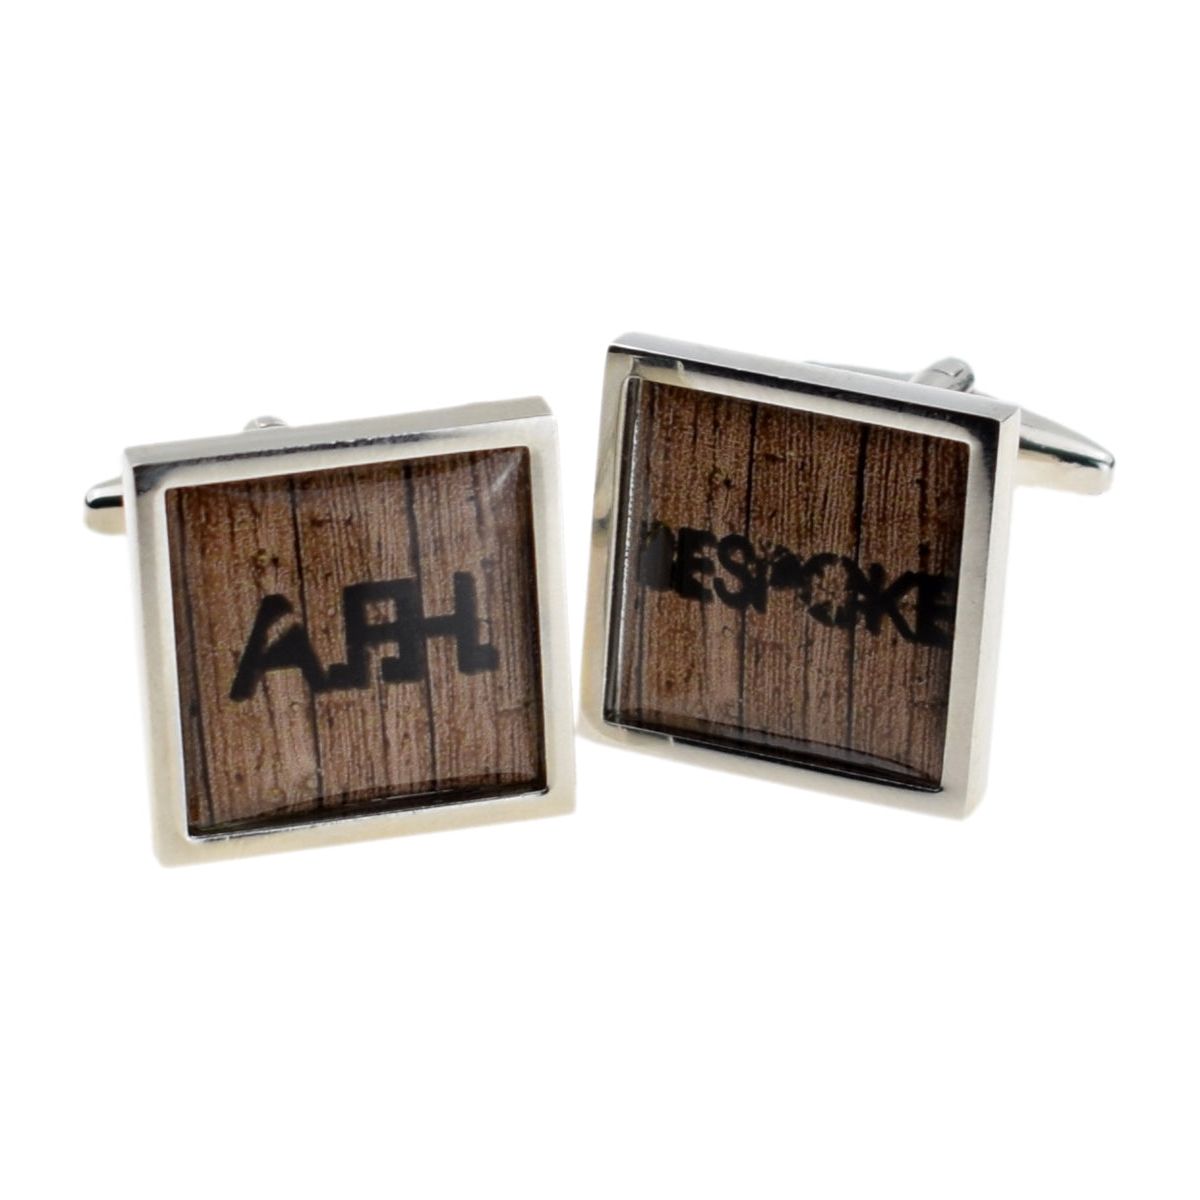 Retro Shabby Chic Personalised Wooden Effect Cufflinks - Ashton and Finch